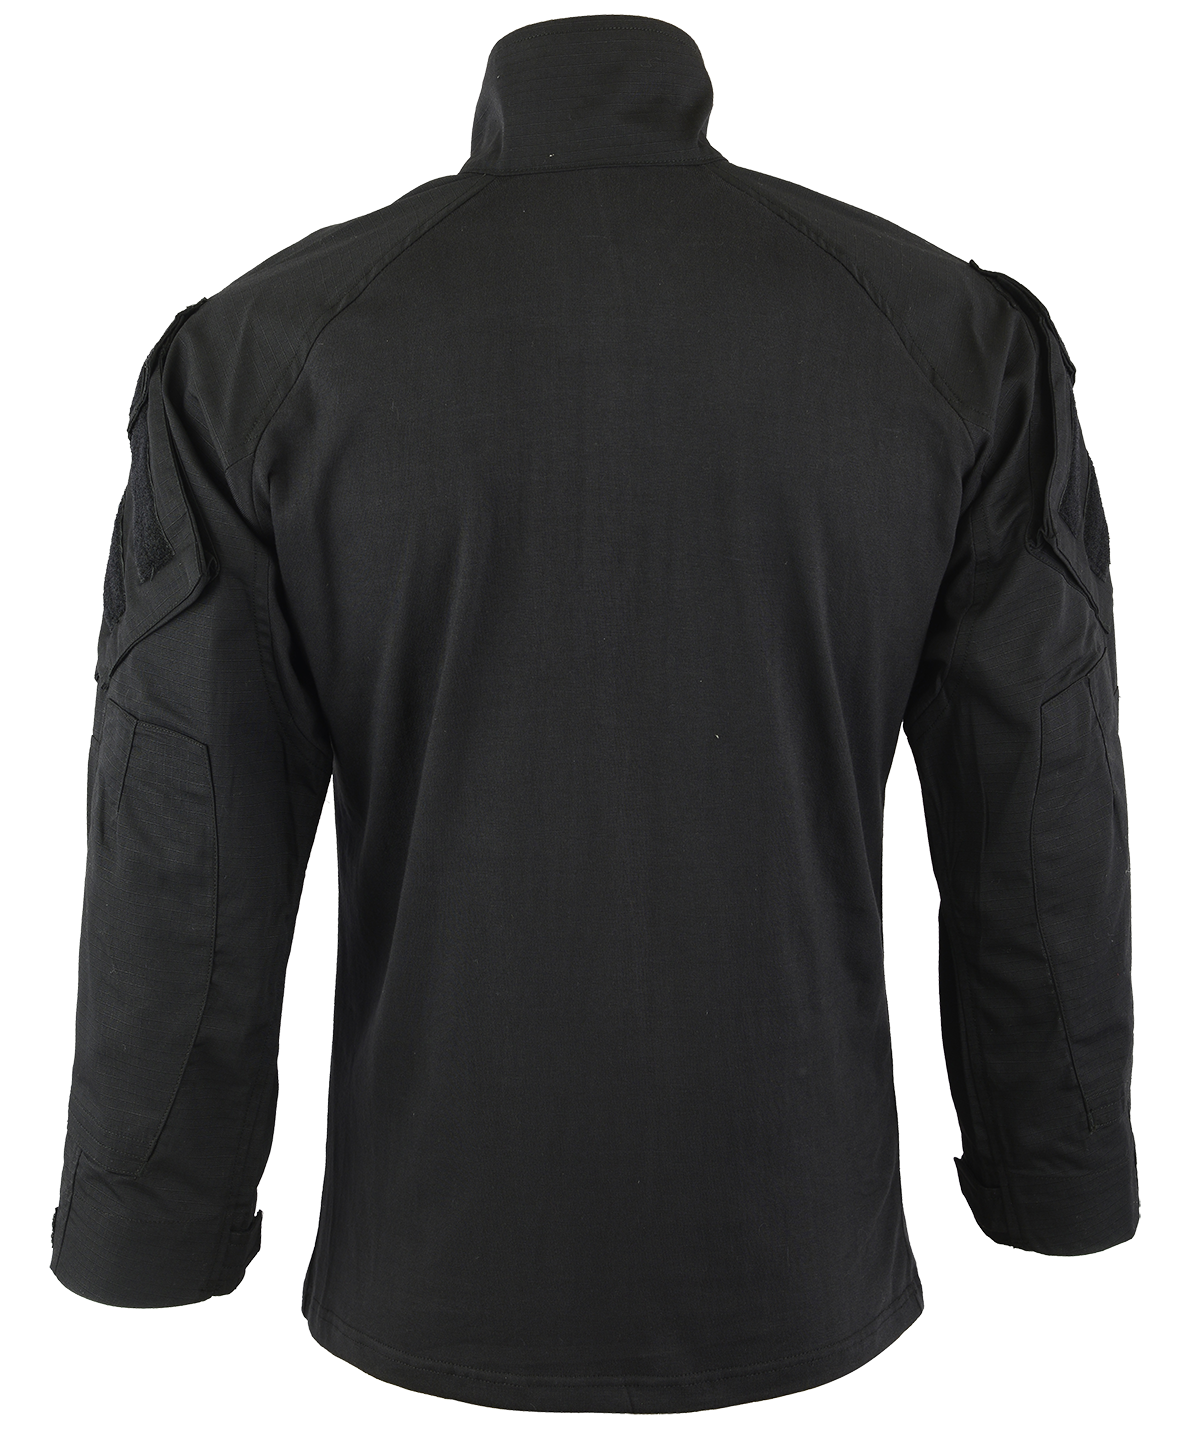 Tactical Zone HYBRID TACTICAL SHIRT IS A PERFECT COMBAT SHIRT Colour  black 